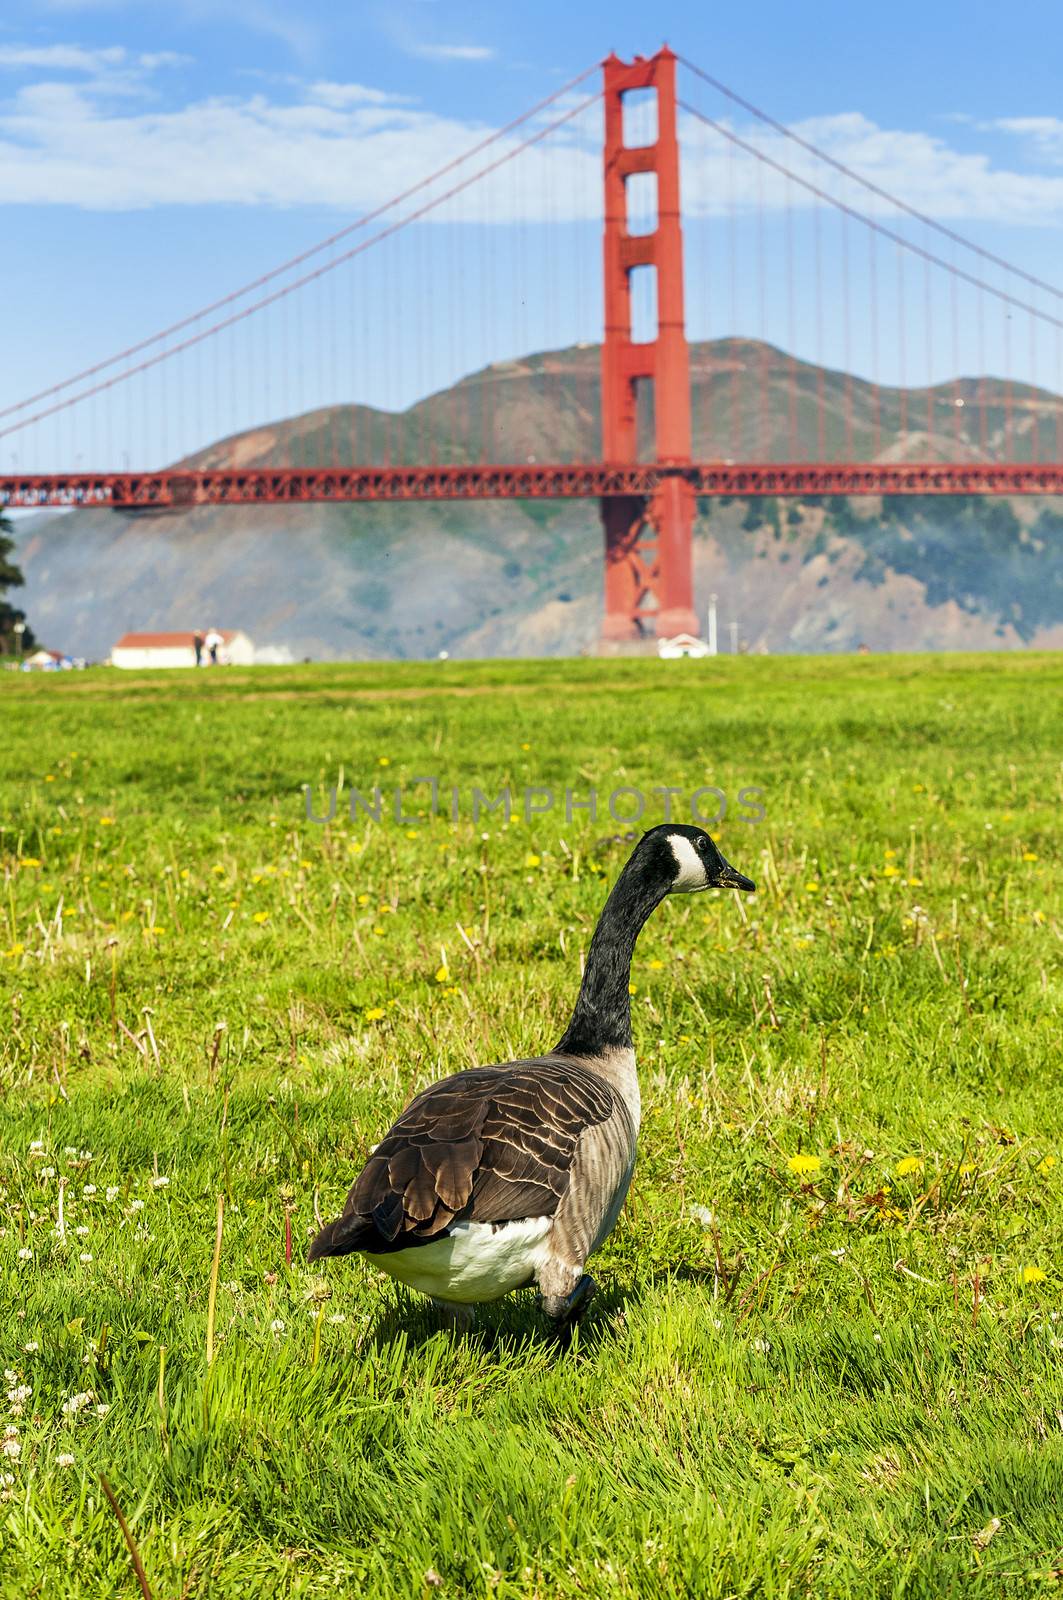 San Francisco bridge USA with a goose is walking in the grass